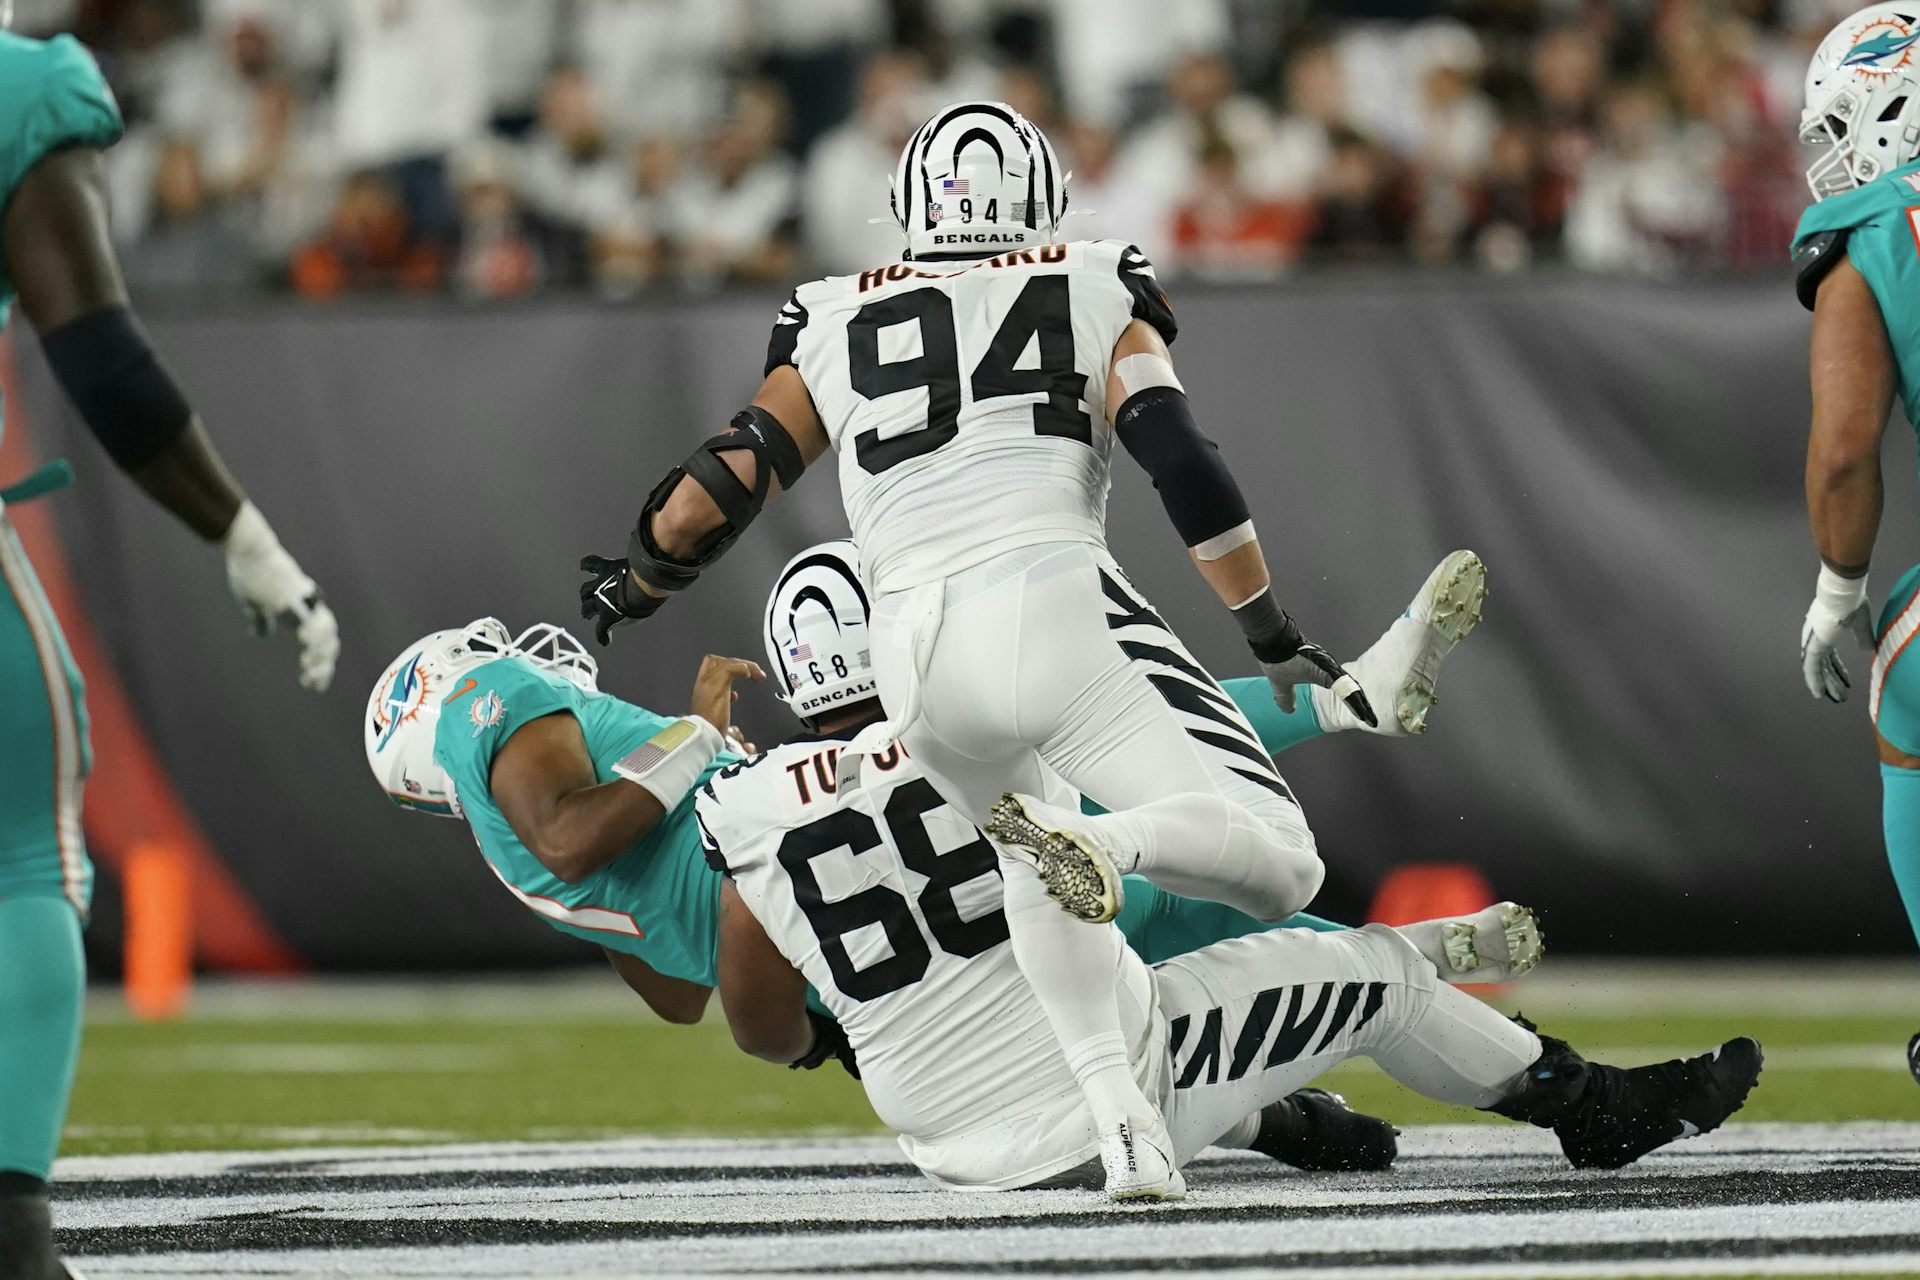 A football player in a teal uniform about to fall to the ground as a player in a white uniform tackles him, while another player in a white uniform runs towards them